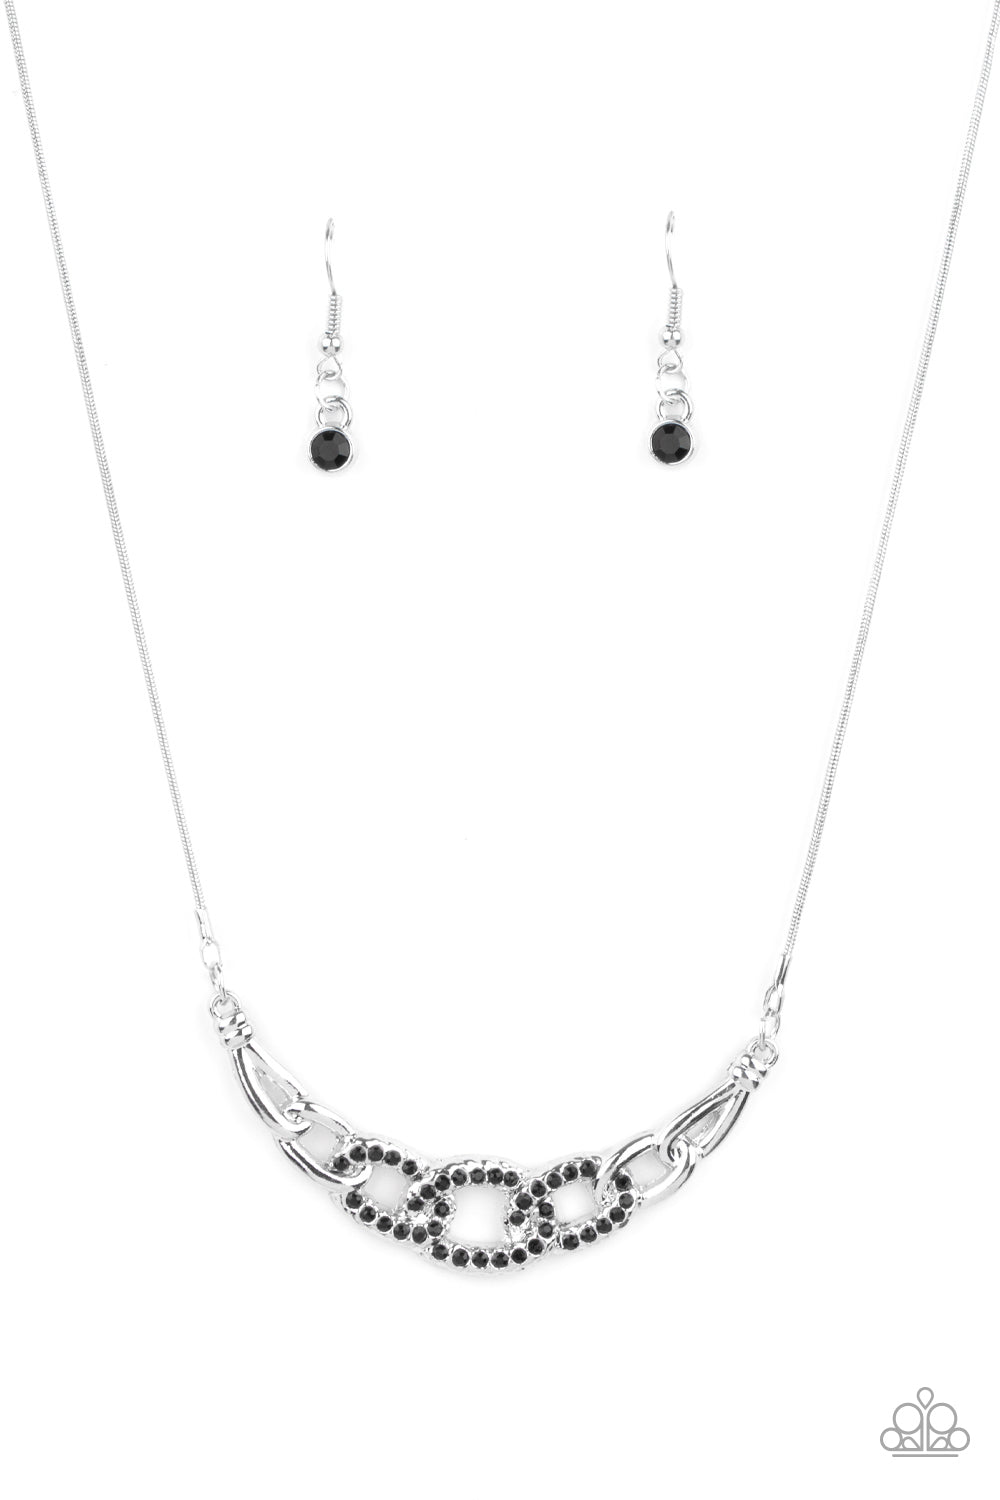 Paparazzi - KNOT In Love - Black Necklace - Alies Bling Bar